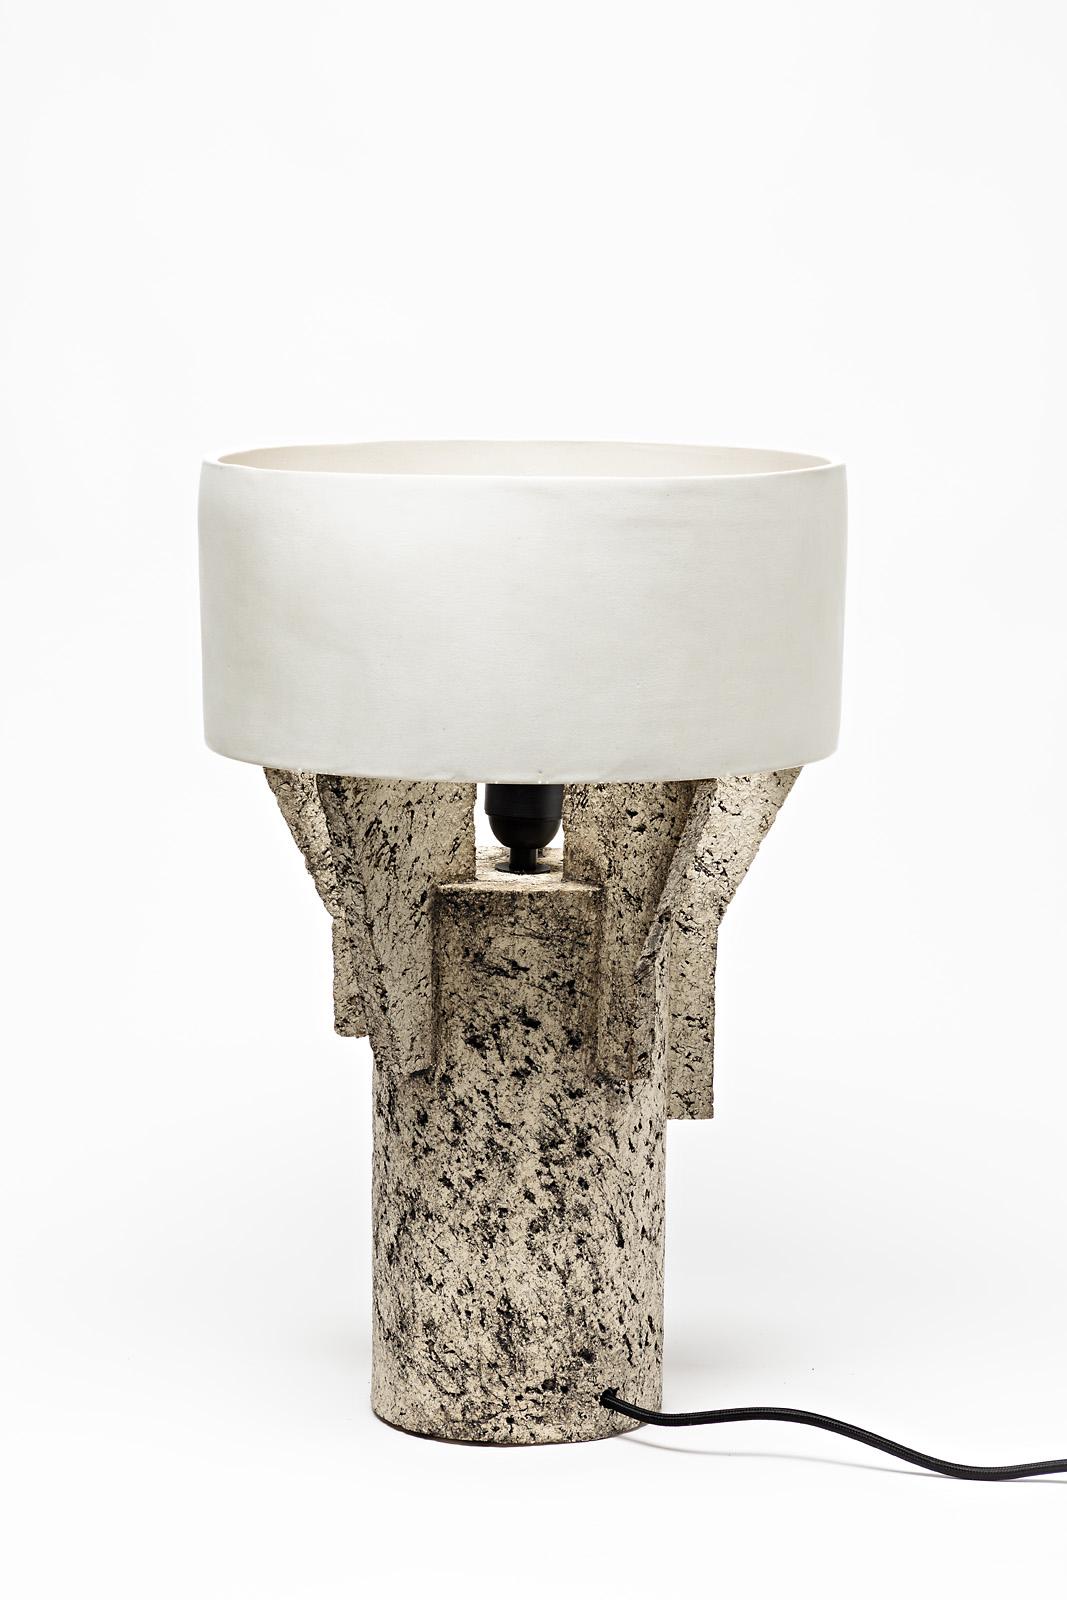 Ceramic Table Lamp by Denis Castaing with White Glaze Decoration, 2019 In New Condition For Sale In Saint-Ouen, FR